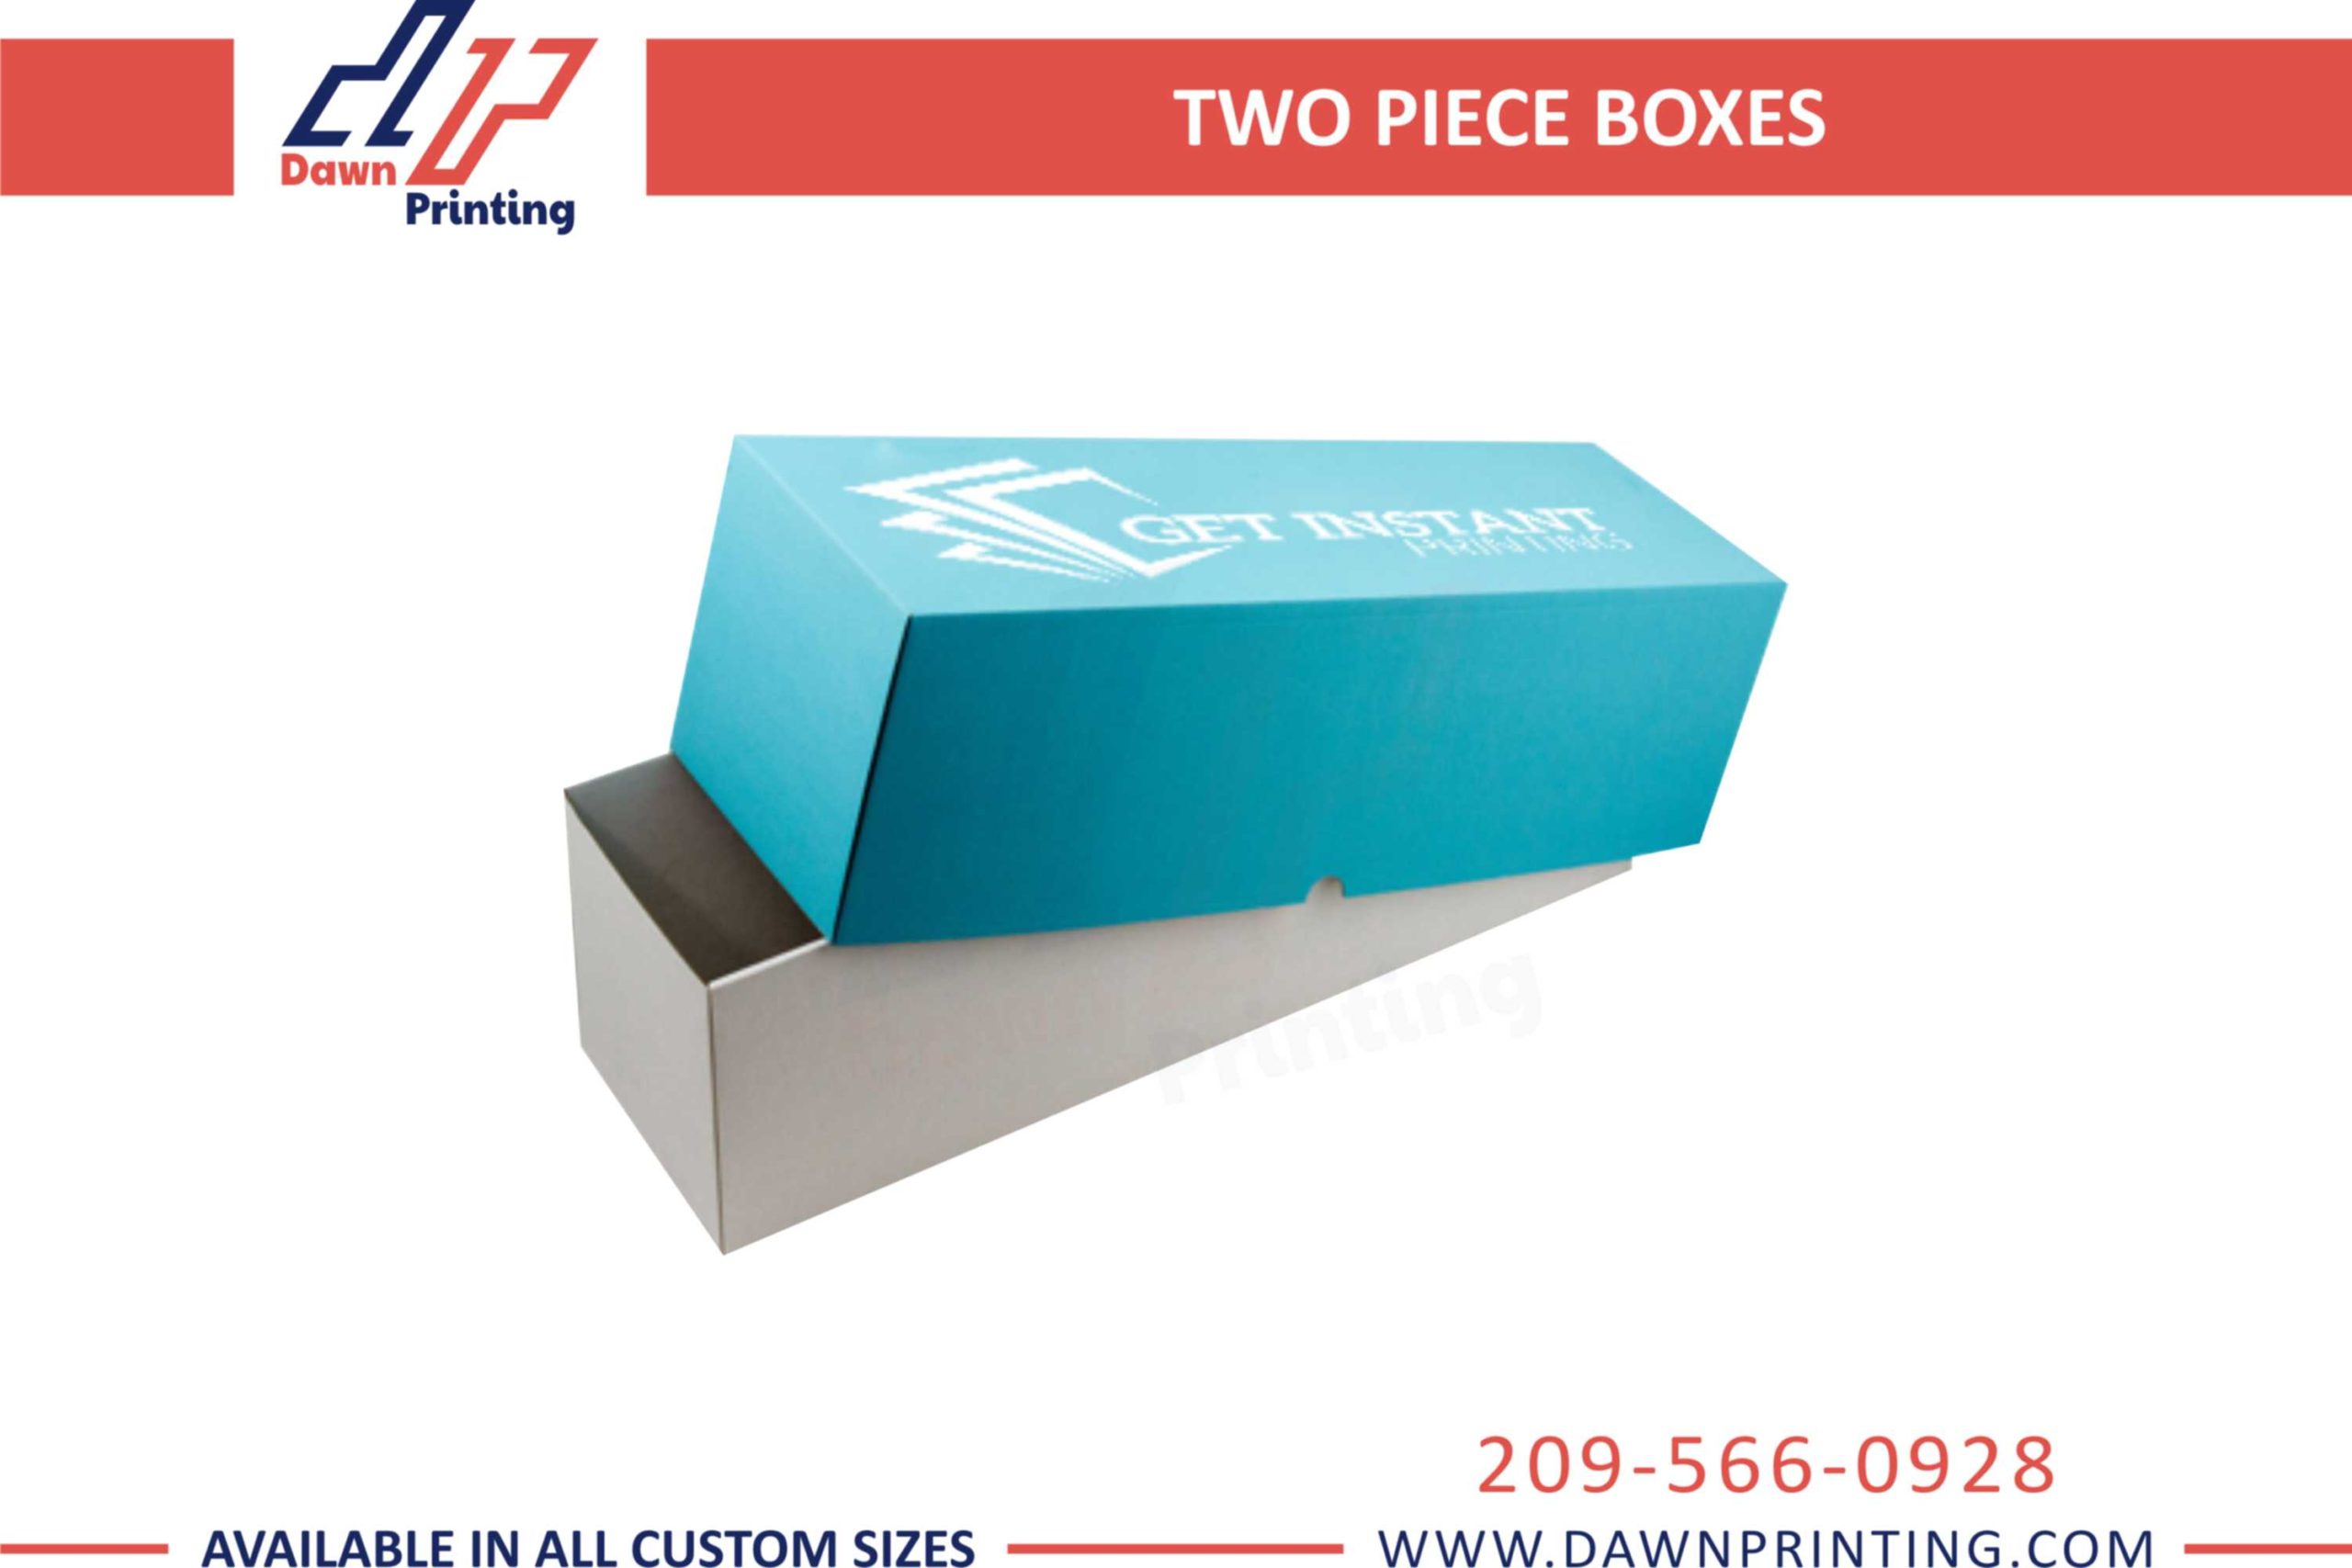 Two Piece Boxes - Dawn Printing